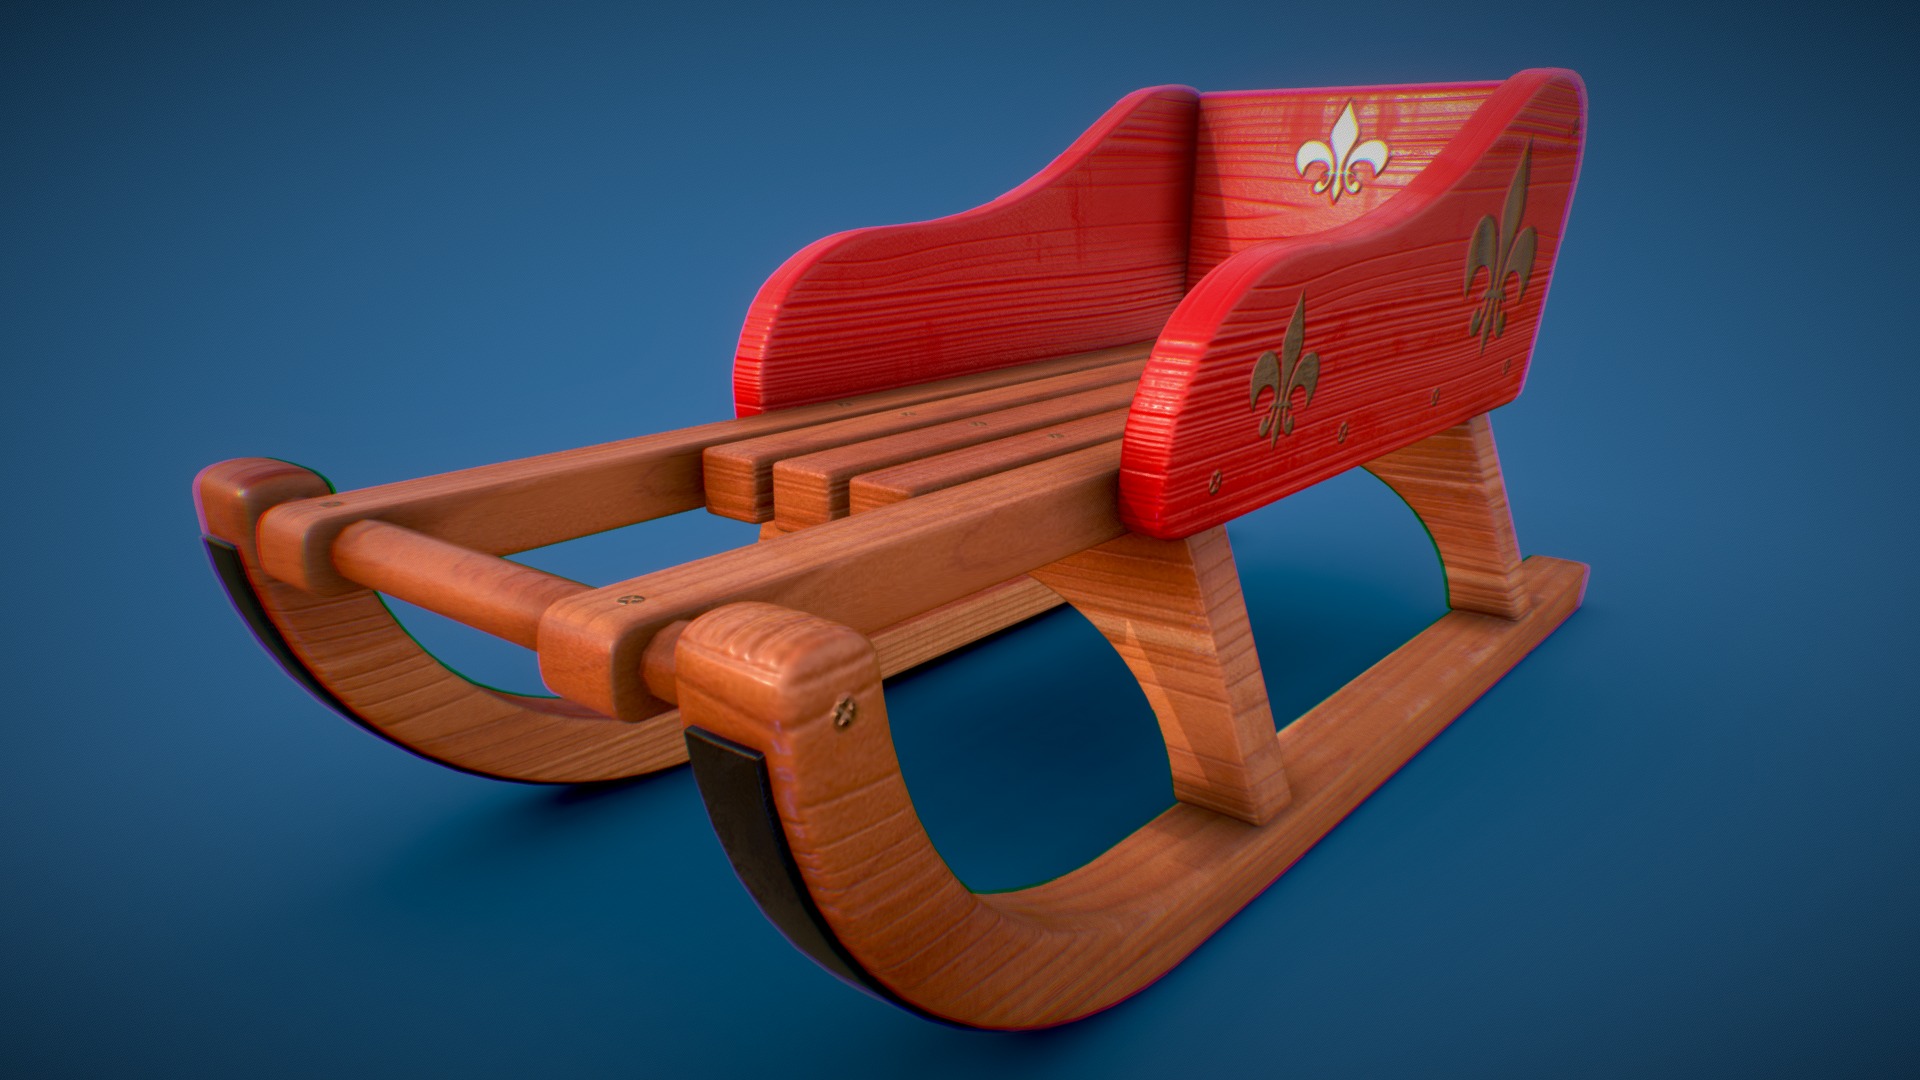 3D model #3December #Day19 Game of Sleds - This is a 3D model of the #3December #Day19 Game of Sleds. The 3D model is about a wooden toy gun.